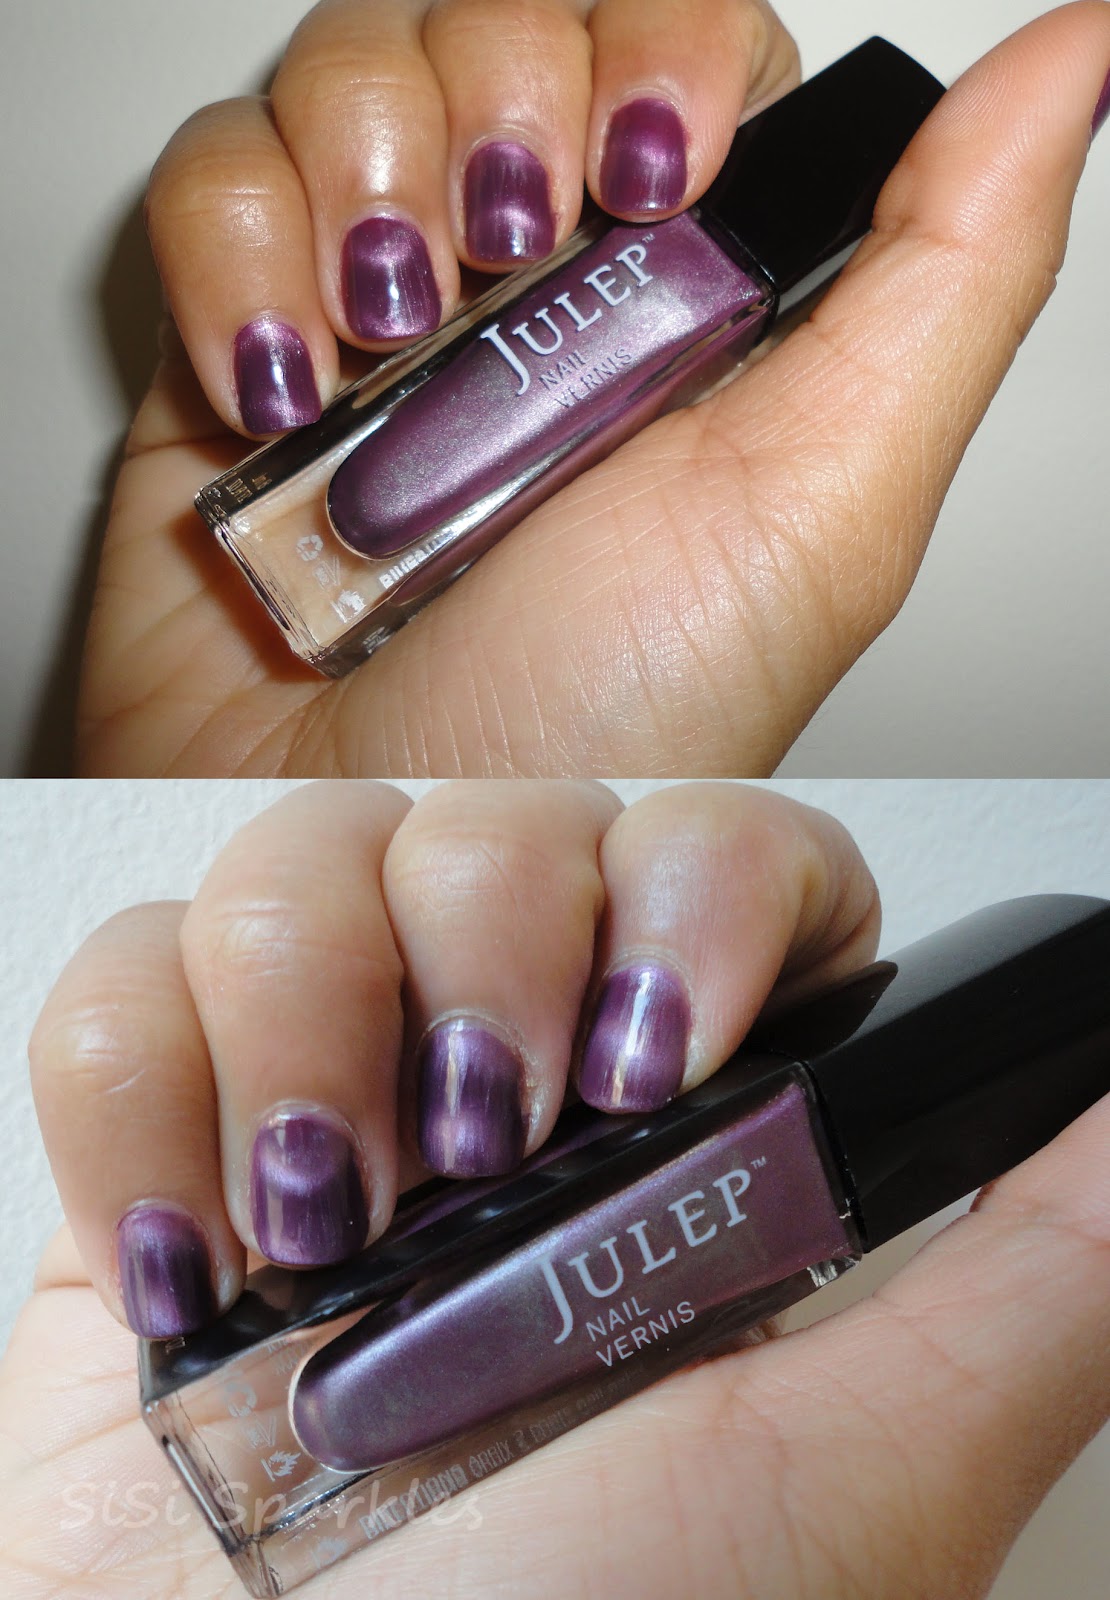 Kylie is a sultry violet magnetic nail polish. It was a first time for me to